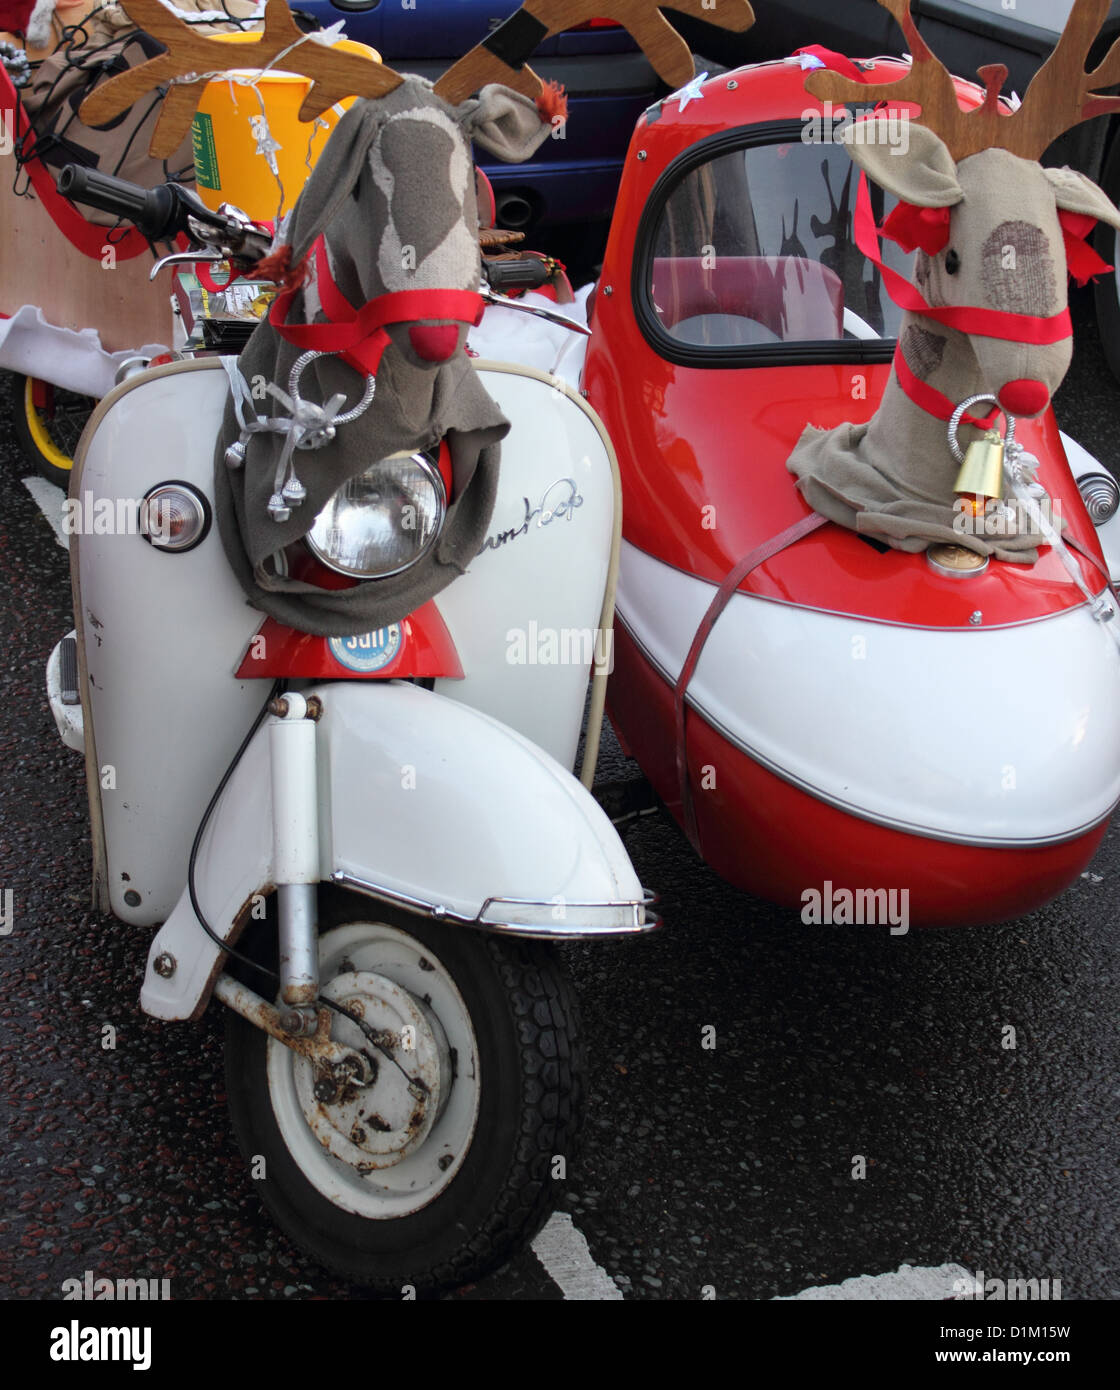 retro scooters at a show on boxing day in England Stock Photo